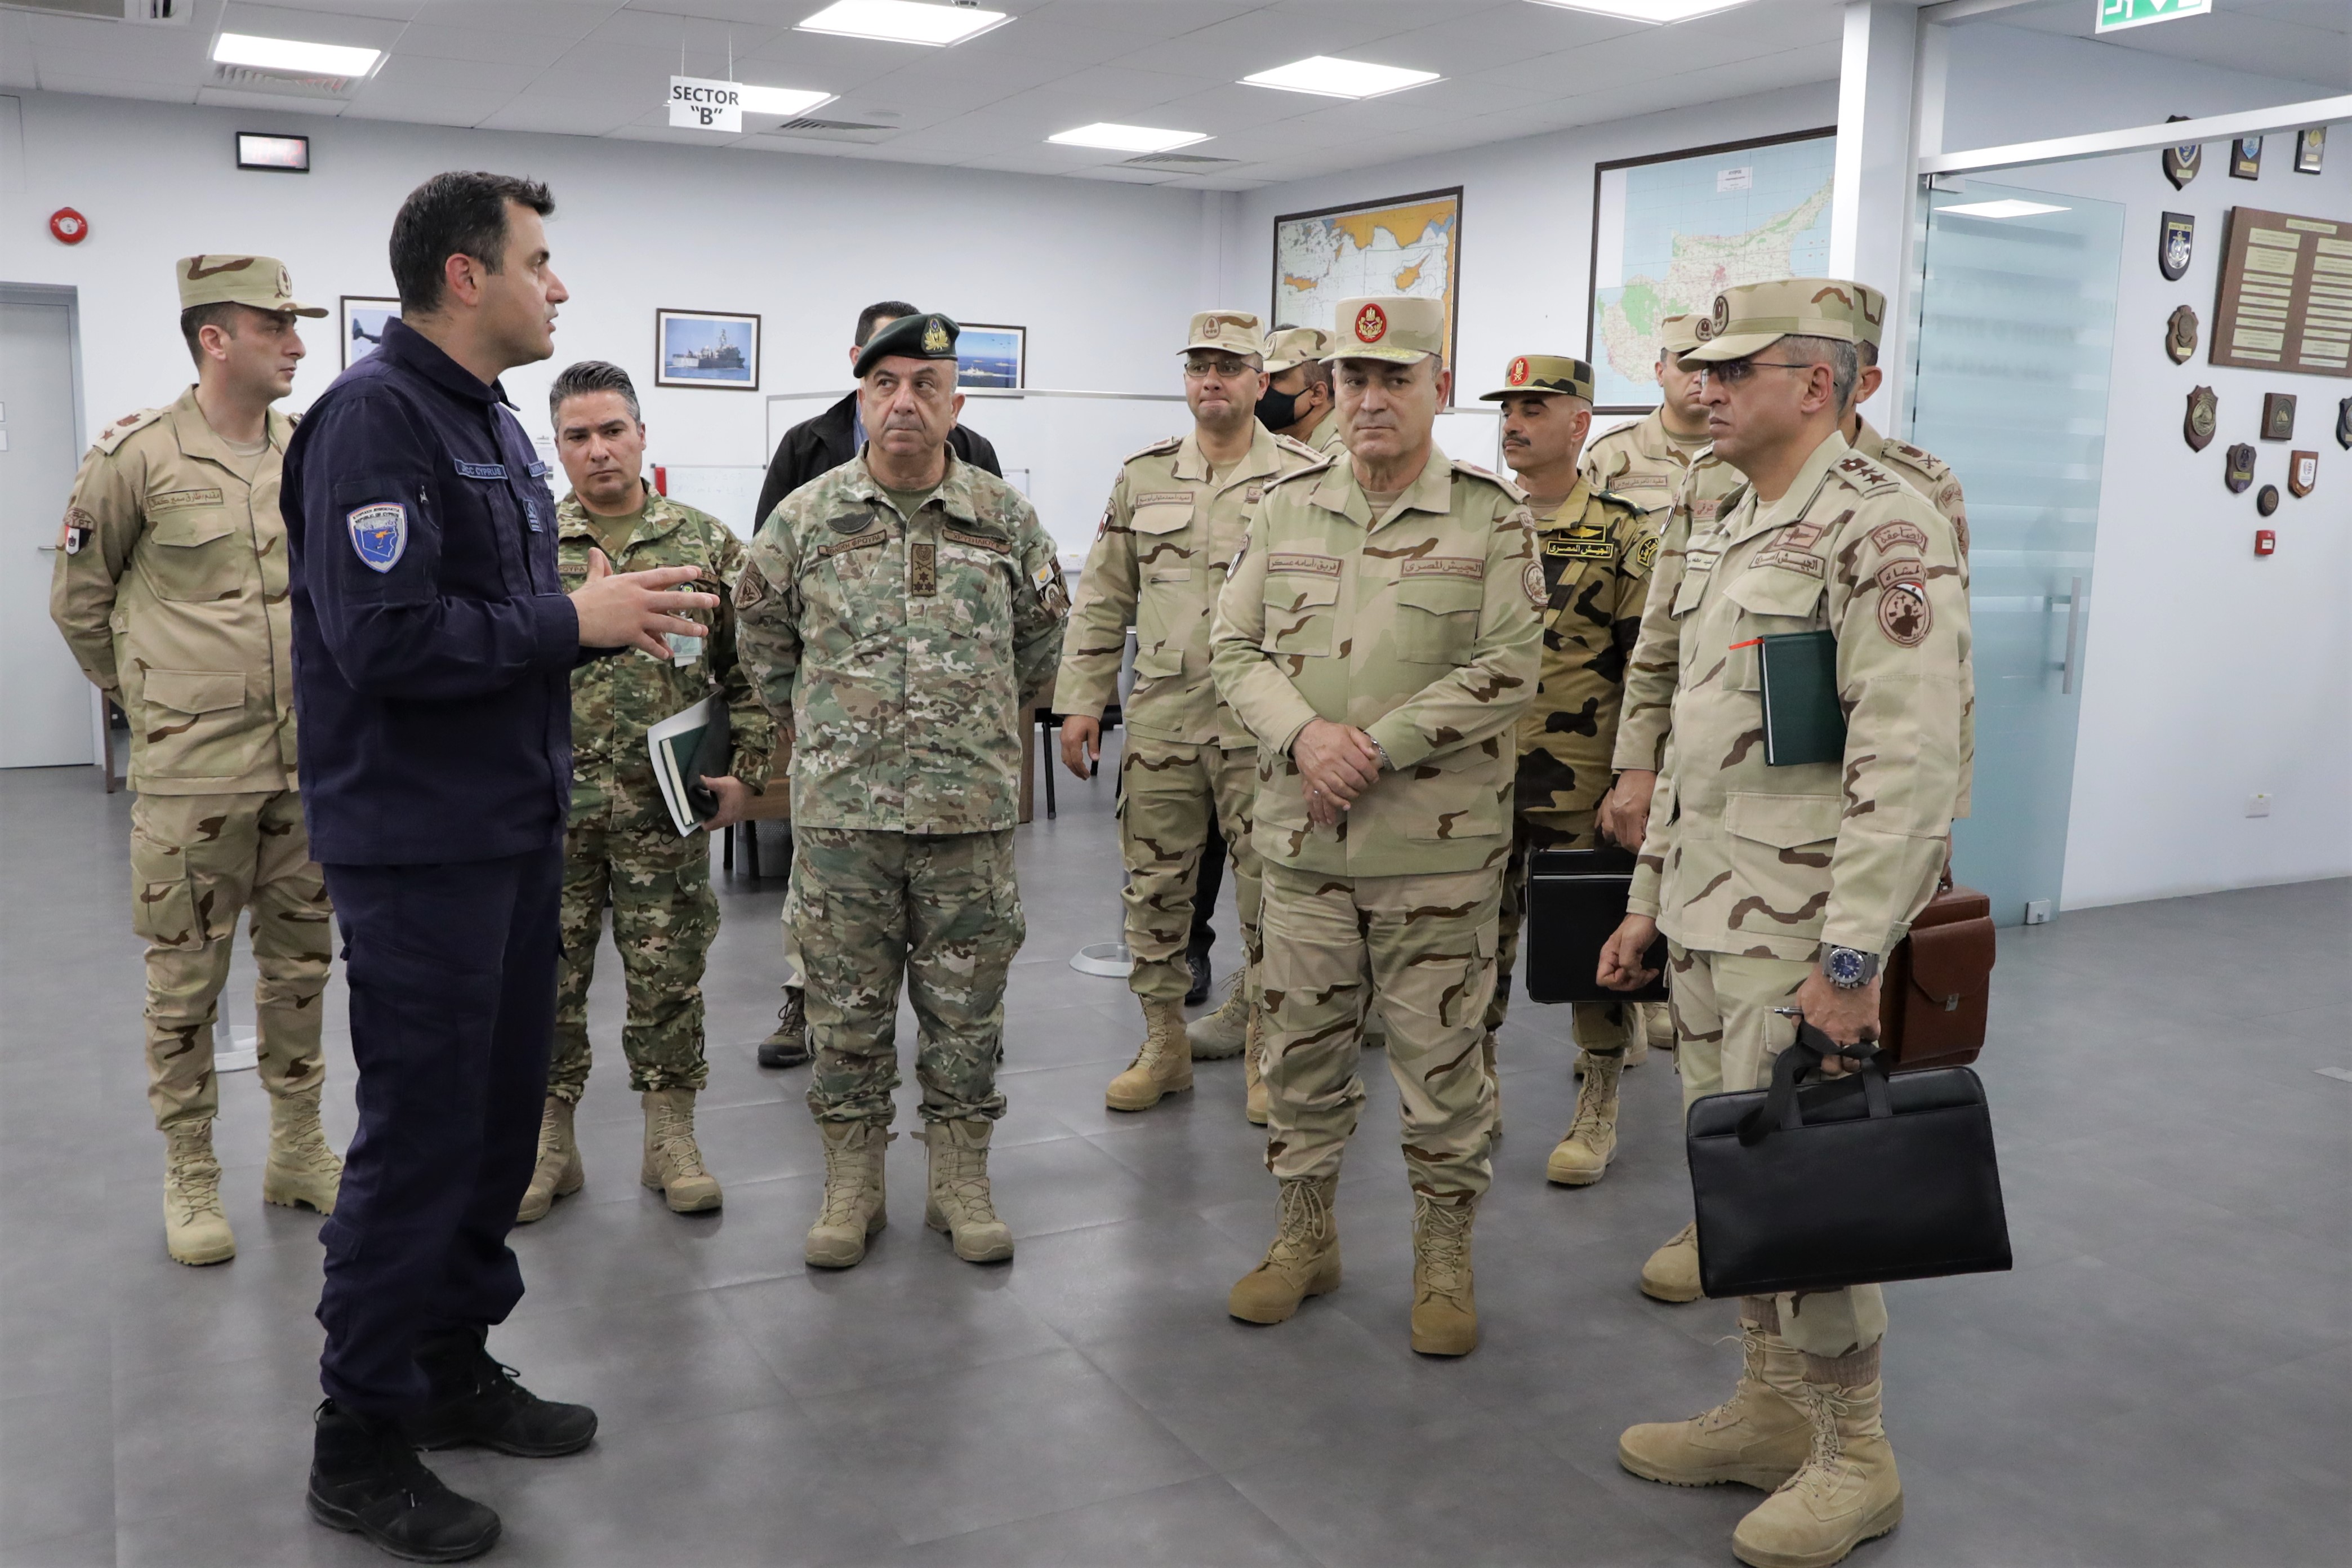 Visit of the Chief of the Armed Forces of the Arab Republic of Egypt to the JRCC